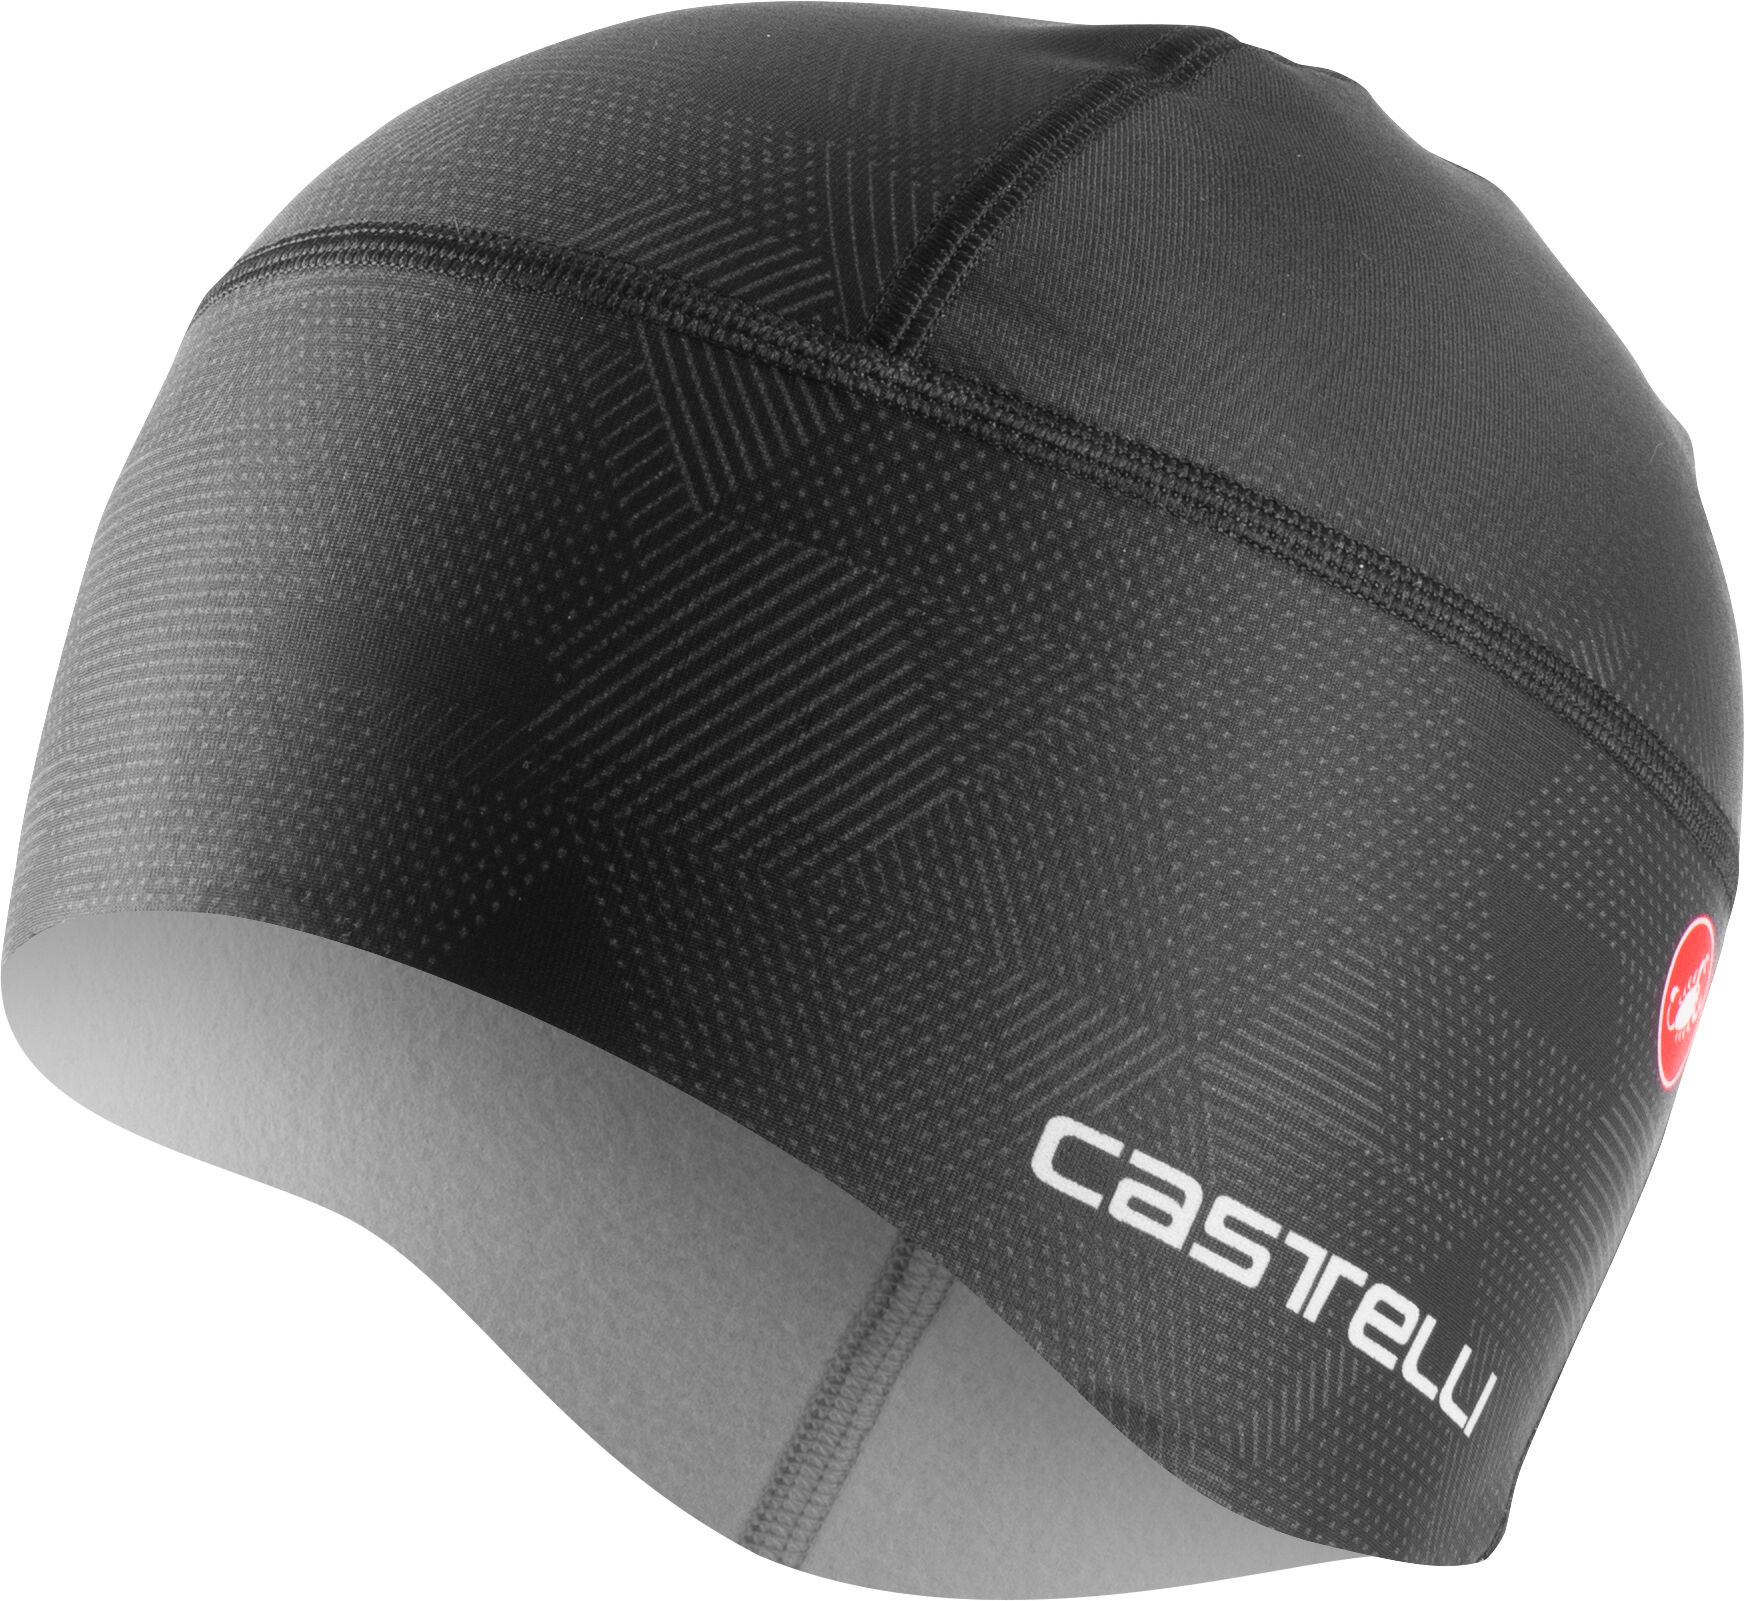 Castelli Sous-Casque Pro Thermal W - Hoofdband - Dames